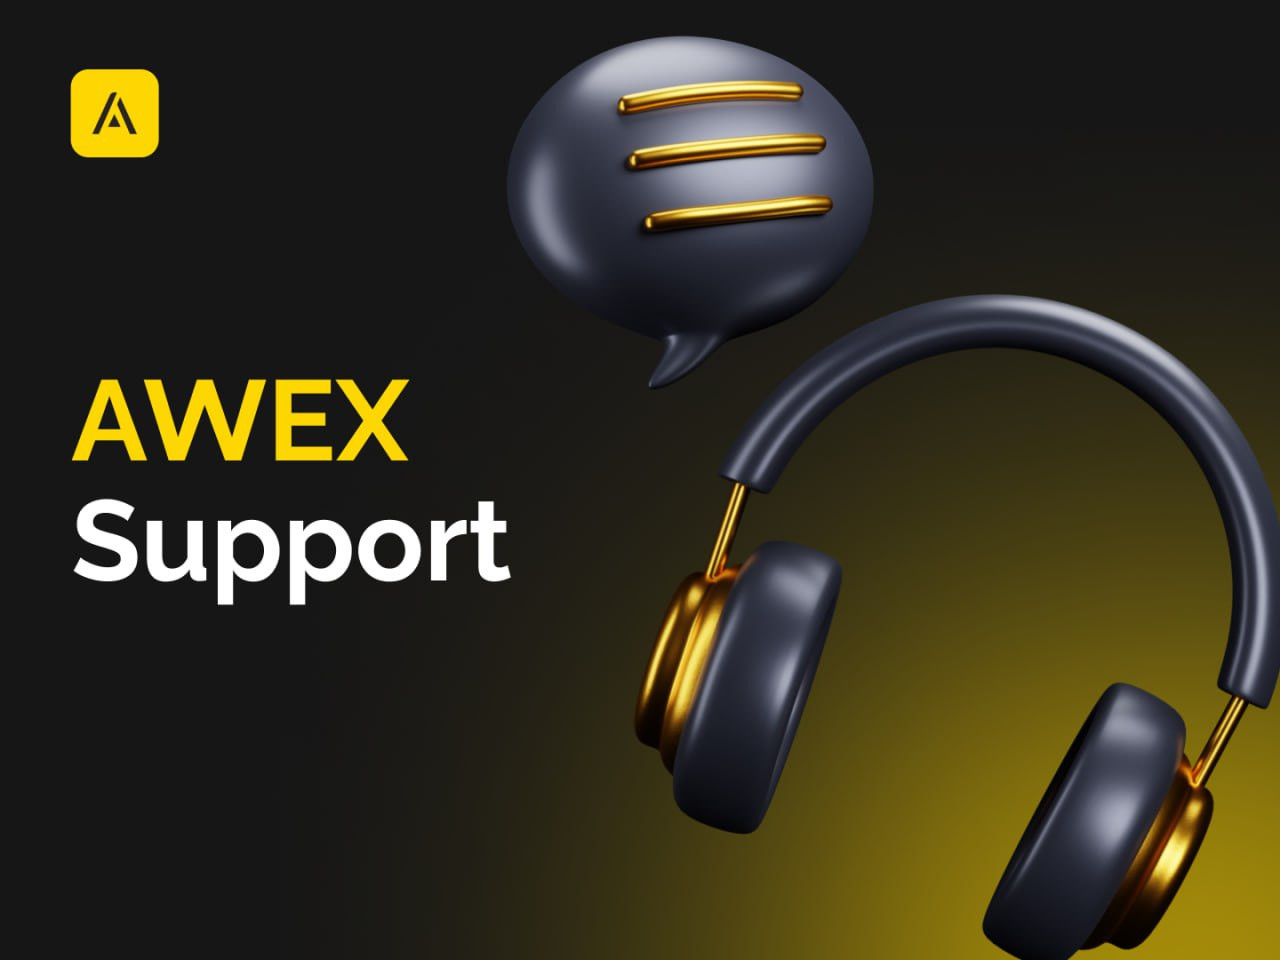 How do I promptly resolve an issue through AWEX support?